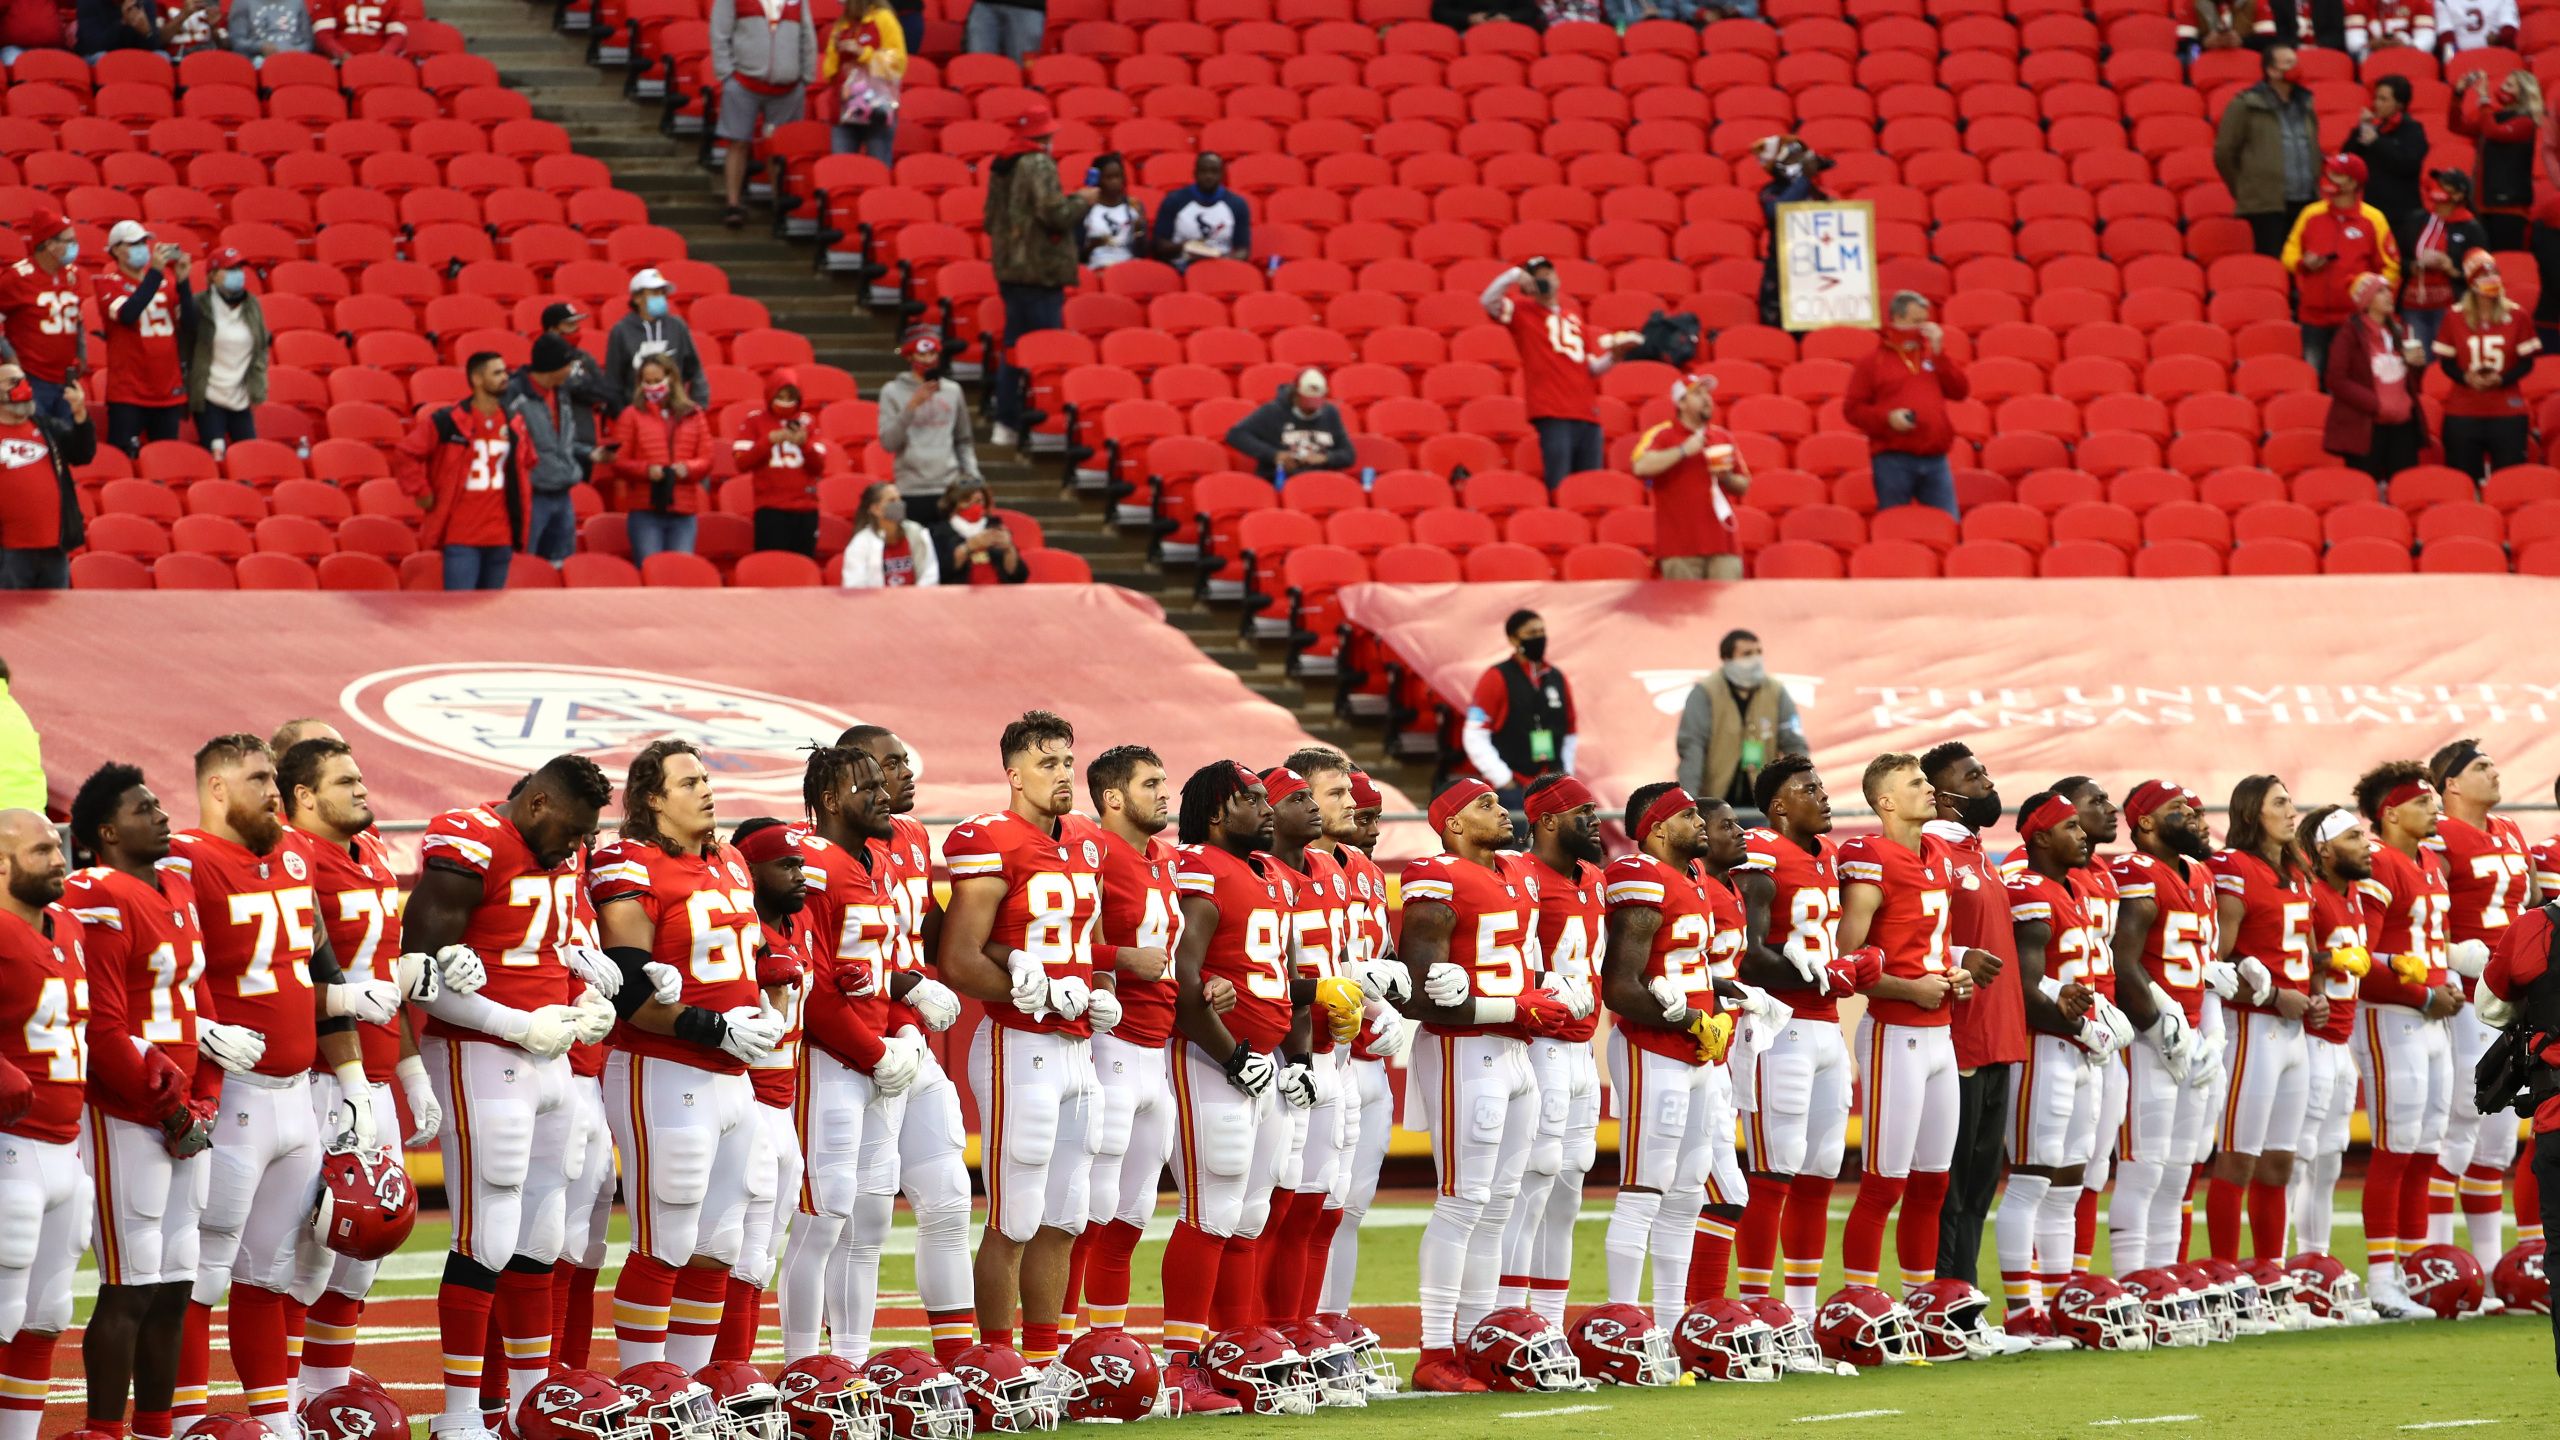 Chiefs, Texans Link Arms On Field During Moment Of Silence For Racial Unity. FOX 4 Kansas City WDAF TV. News, Weather, Sports